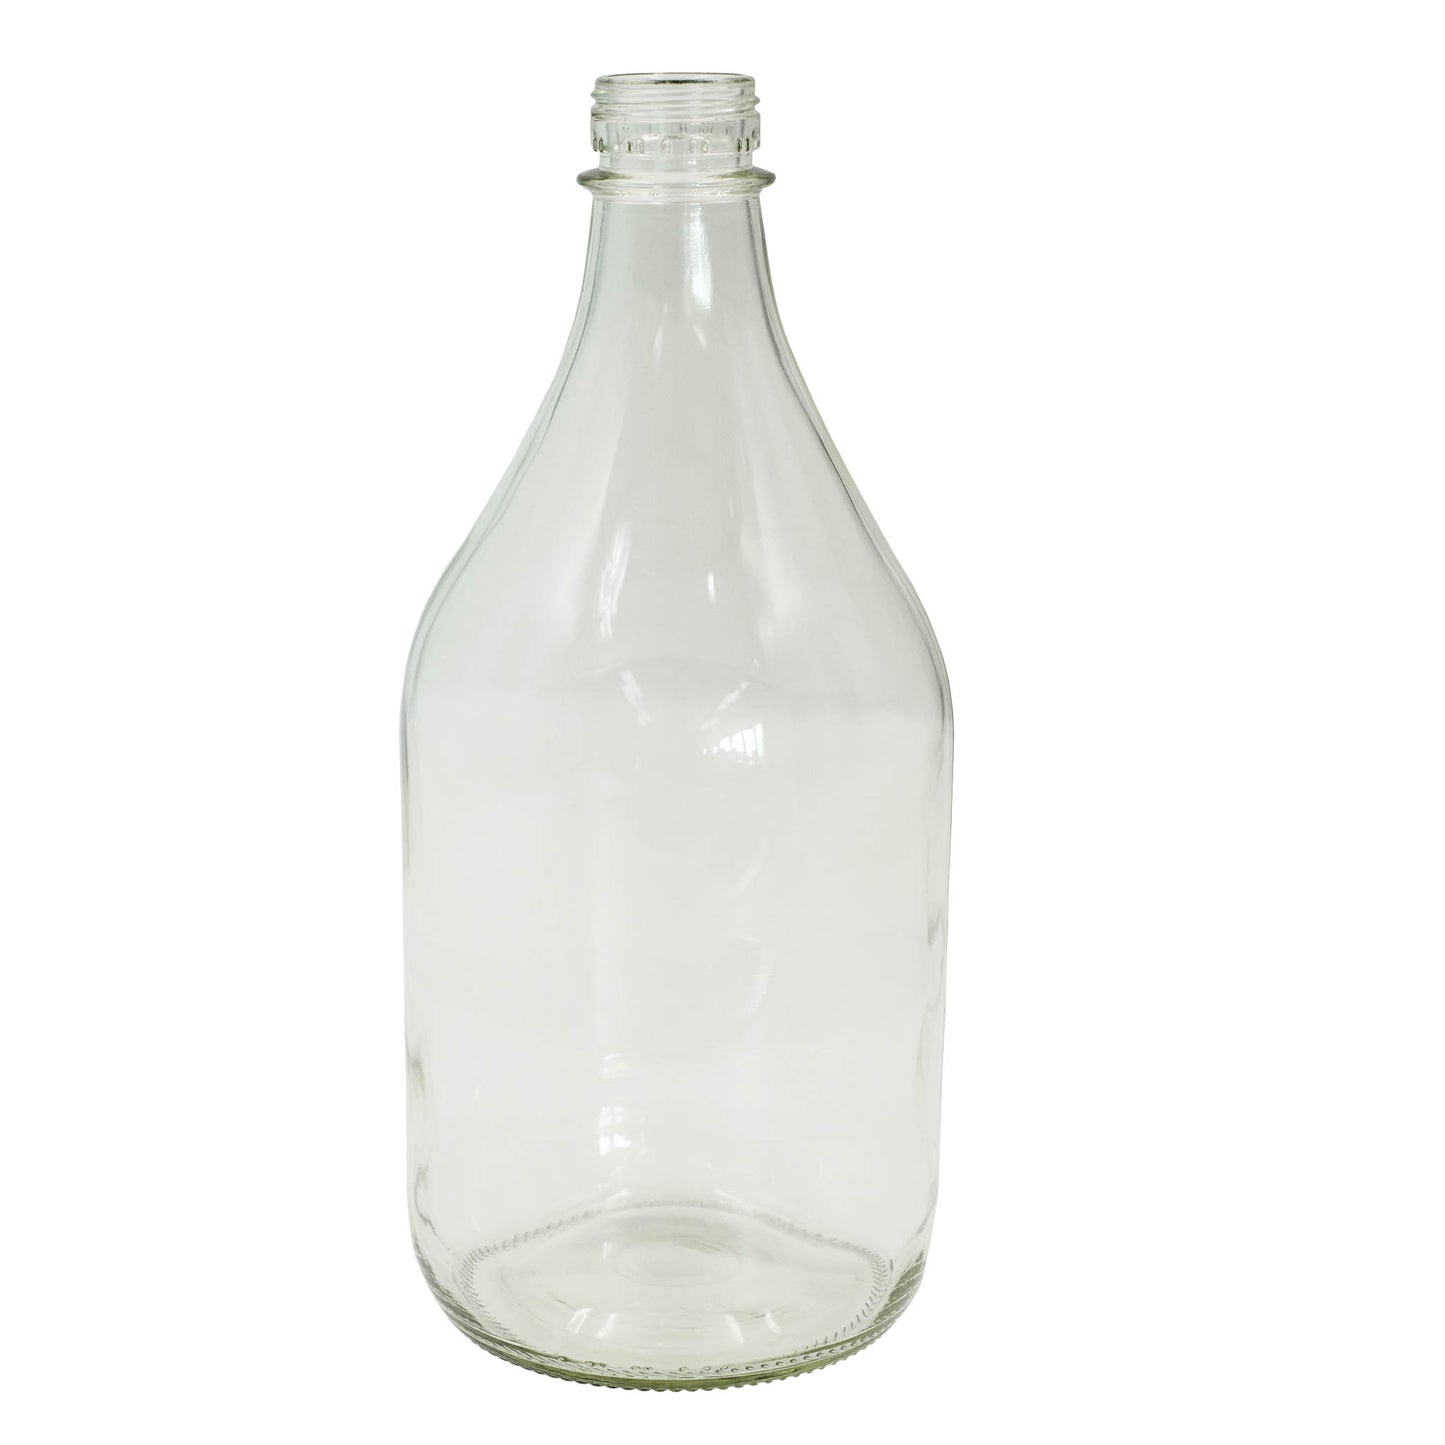 2 litre glass flagon with screw top lid for small batch brewing of kombucha, cider or mead. 